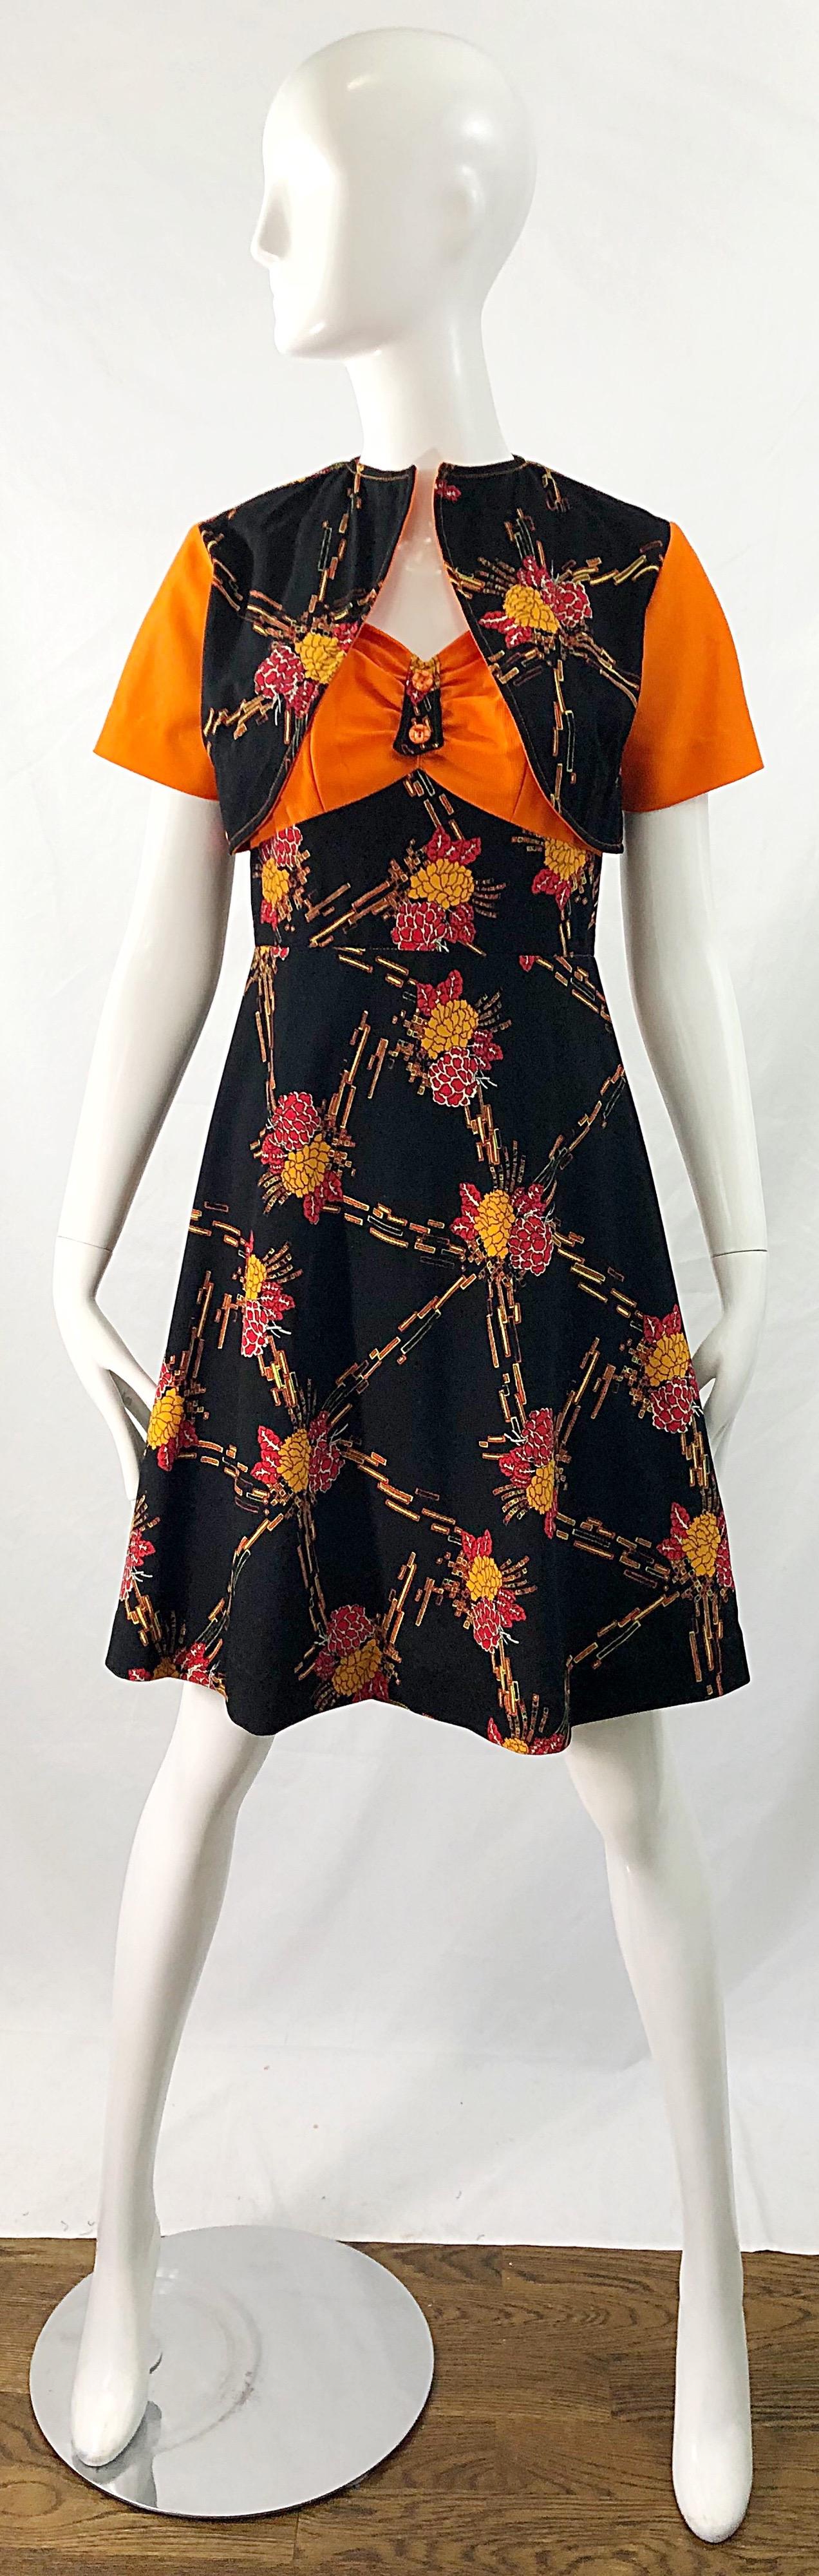 Chic 1970s autumnal colored digital flower printed knit A-Line dress and cropped bolero jacket ! Perfect for Halloween ! Warm vibrant colors of orange, marigold, red and white on a black backdrop. Hidden zipper up the back with hook-and-eye closure.